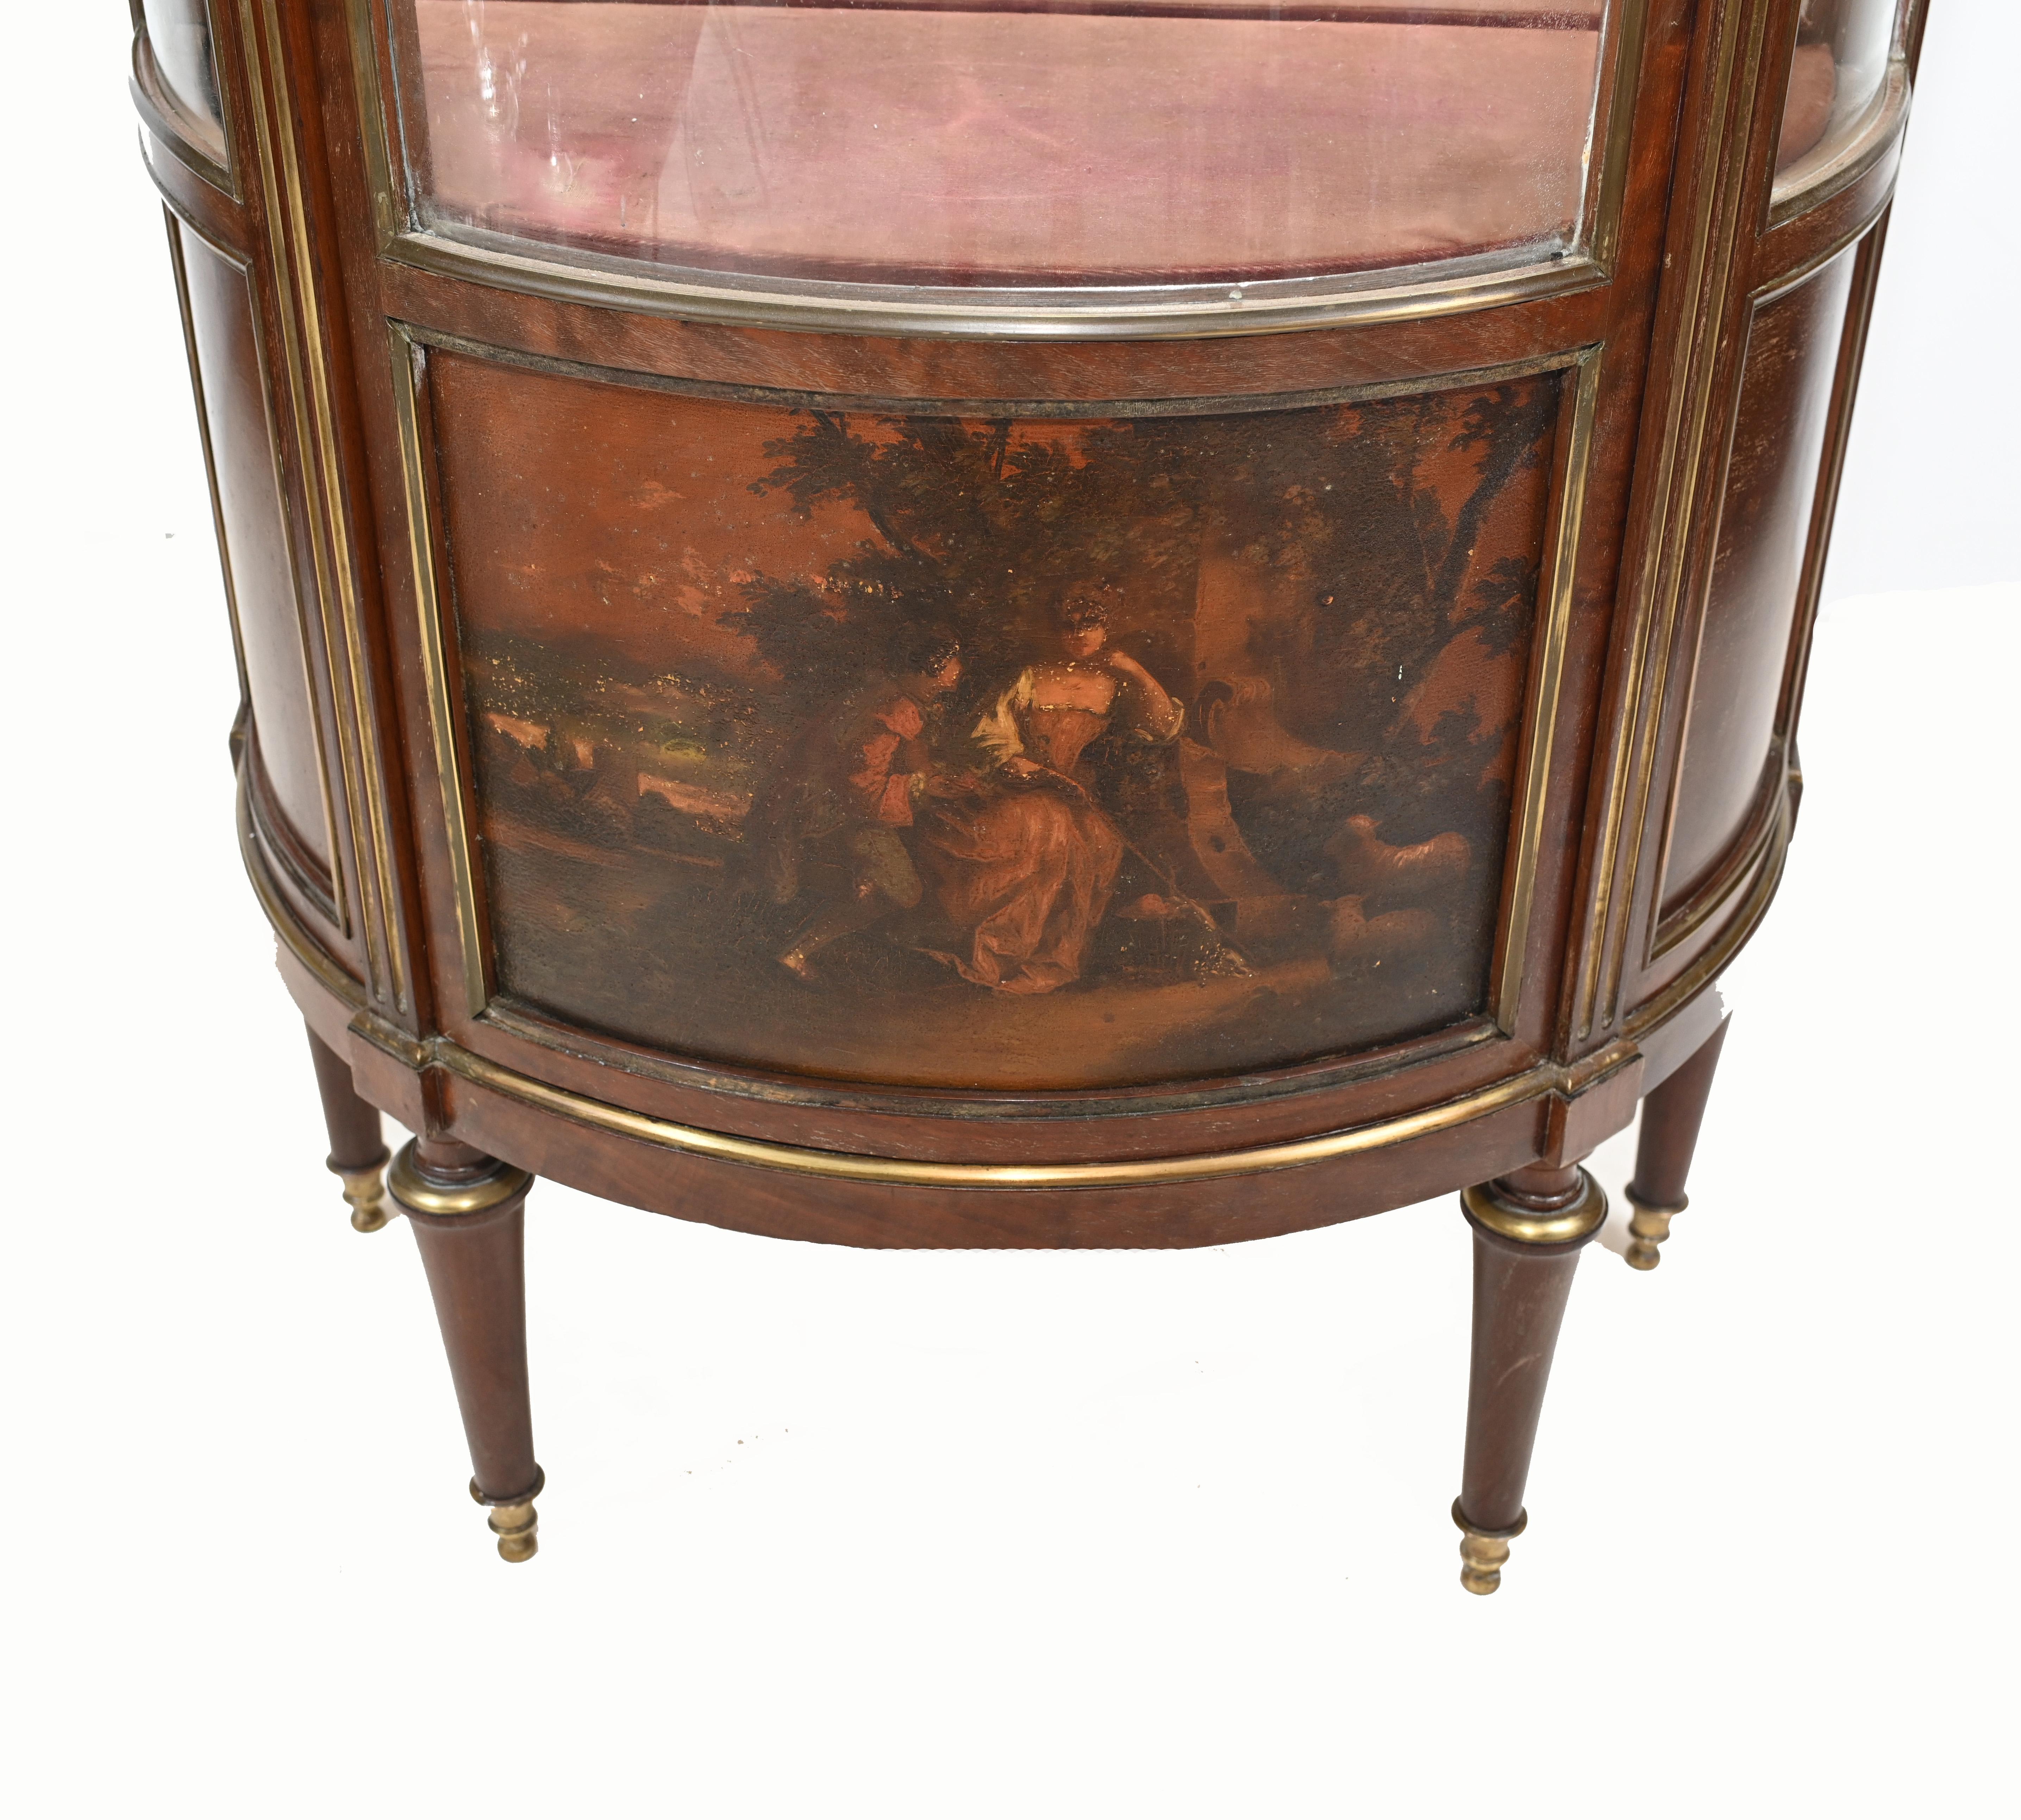 Elegant period French vitrine or display cabinet.
We date this to circa 1870 and it features painted panels in the Vernis Martin manner
Offered in great shape ready for home use right away.
 
 